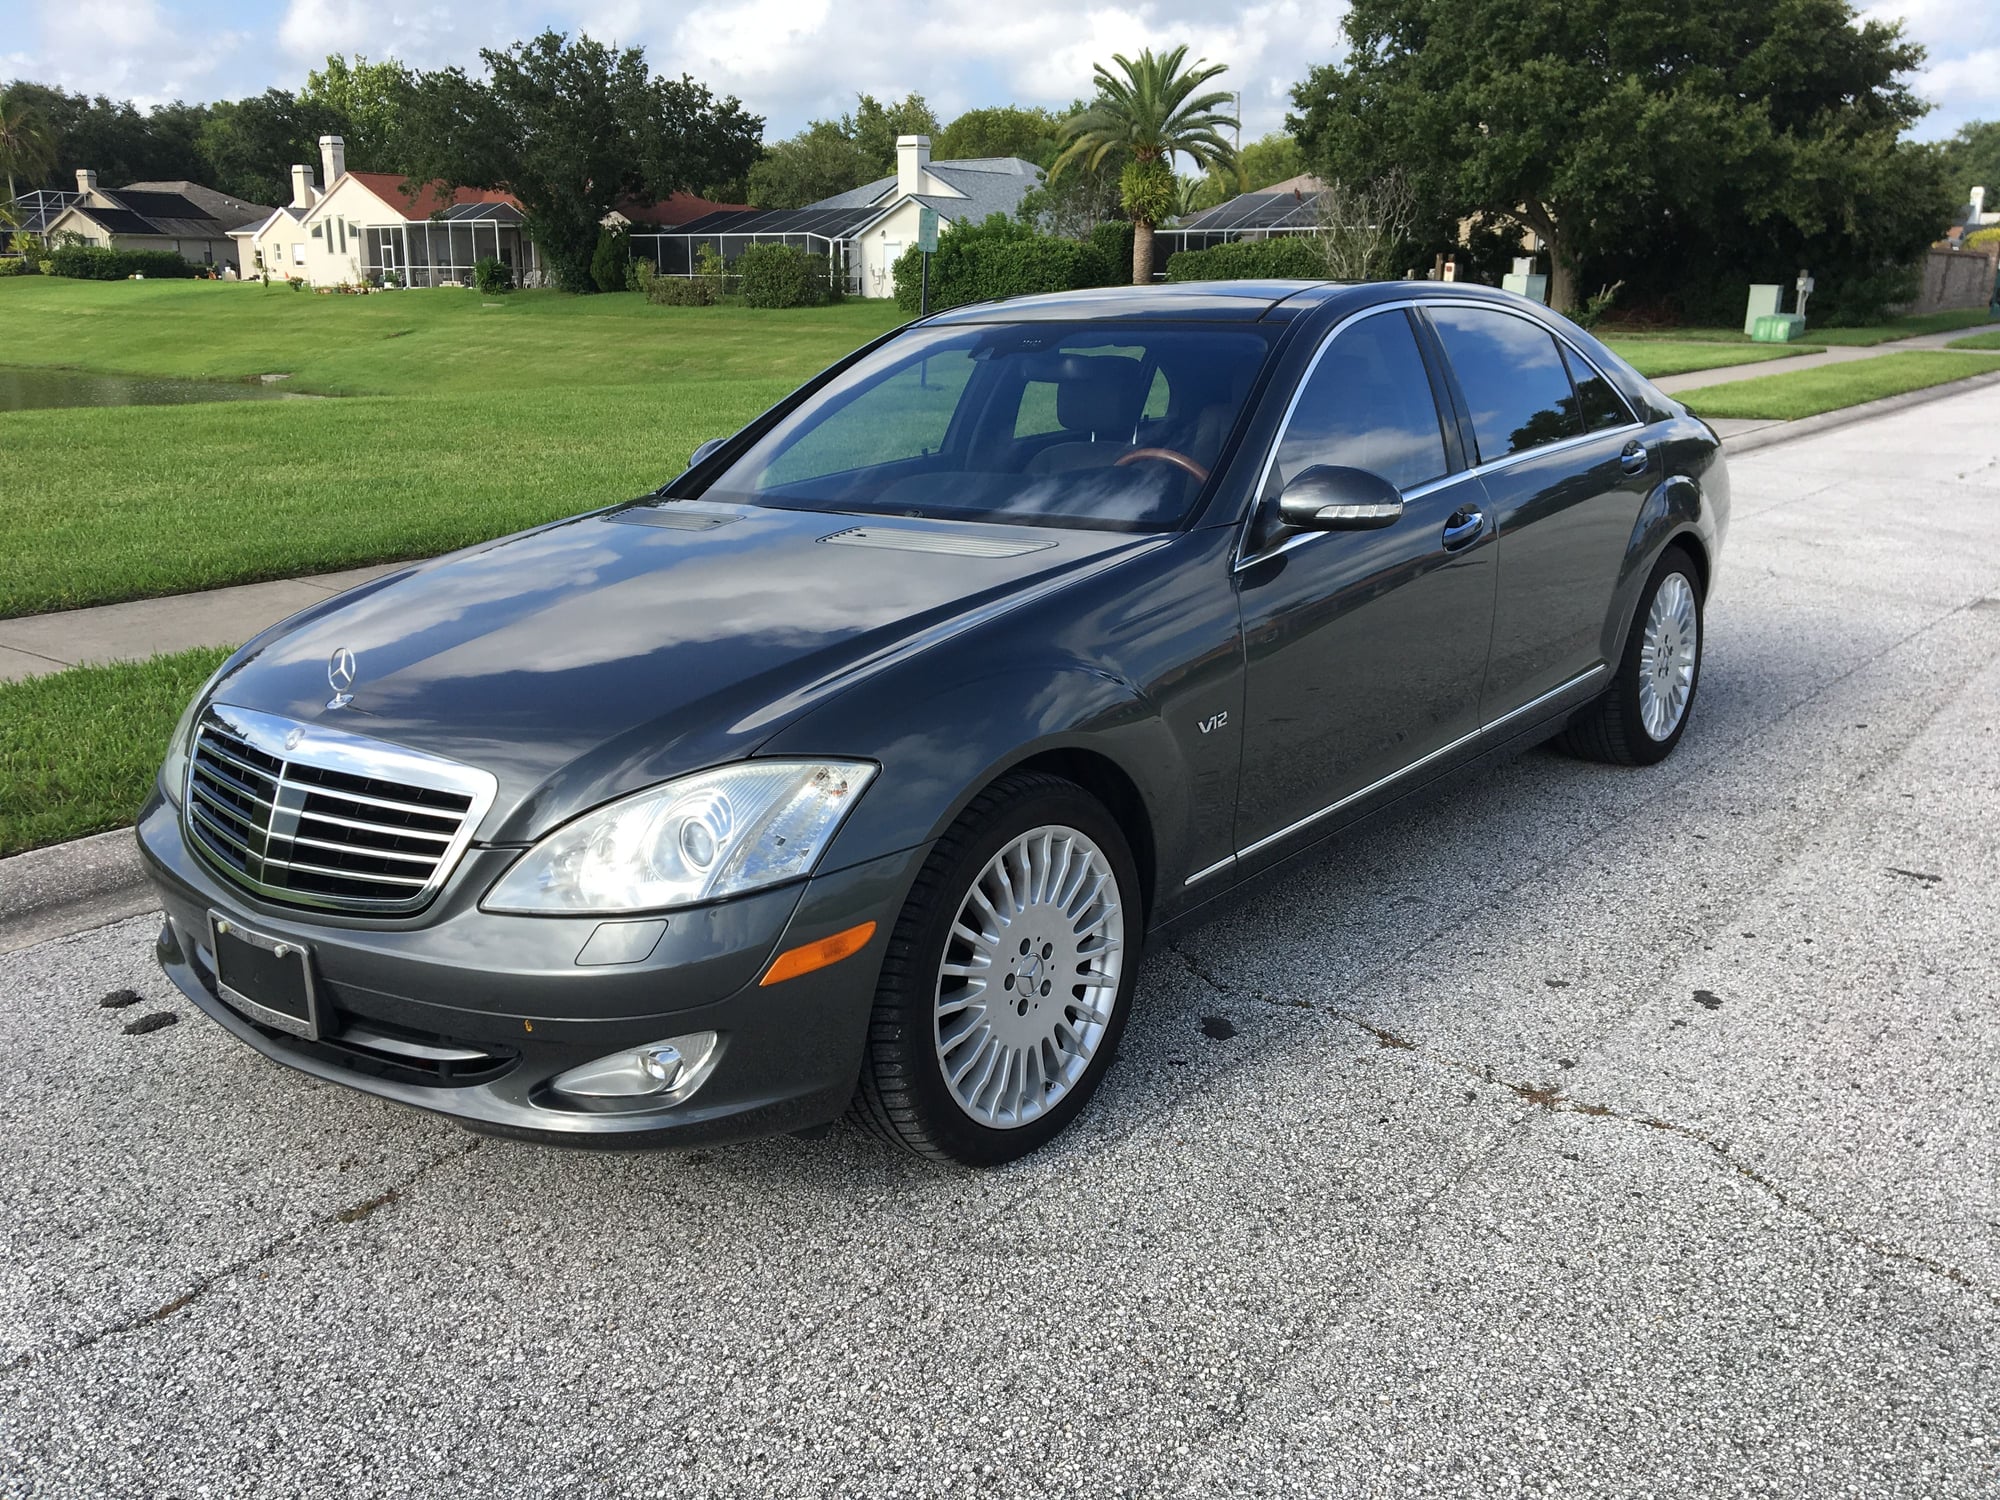 2007 Mercedes-Benz S600 - S600 V12 TT W221 Designo, Records from new, original paint, no snow/salt use - Used - VIN WDDNG76X17A139823 - 104,087 Miles - 12 cyl - 2WD - Automatic - Sedan - Gray - Palm Harbor, FL 34683, United States